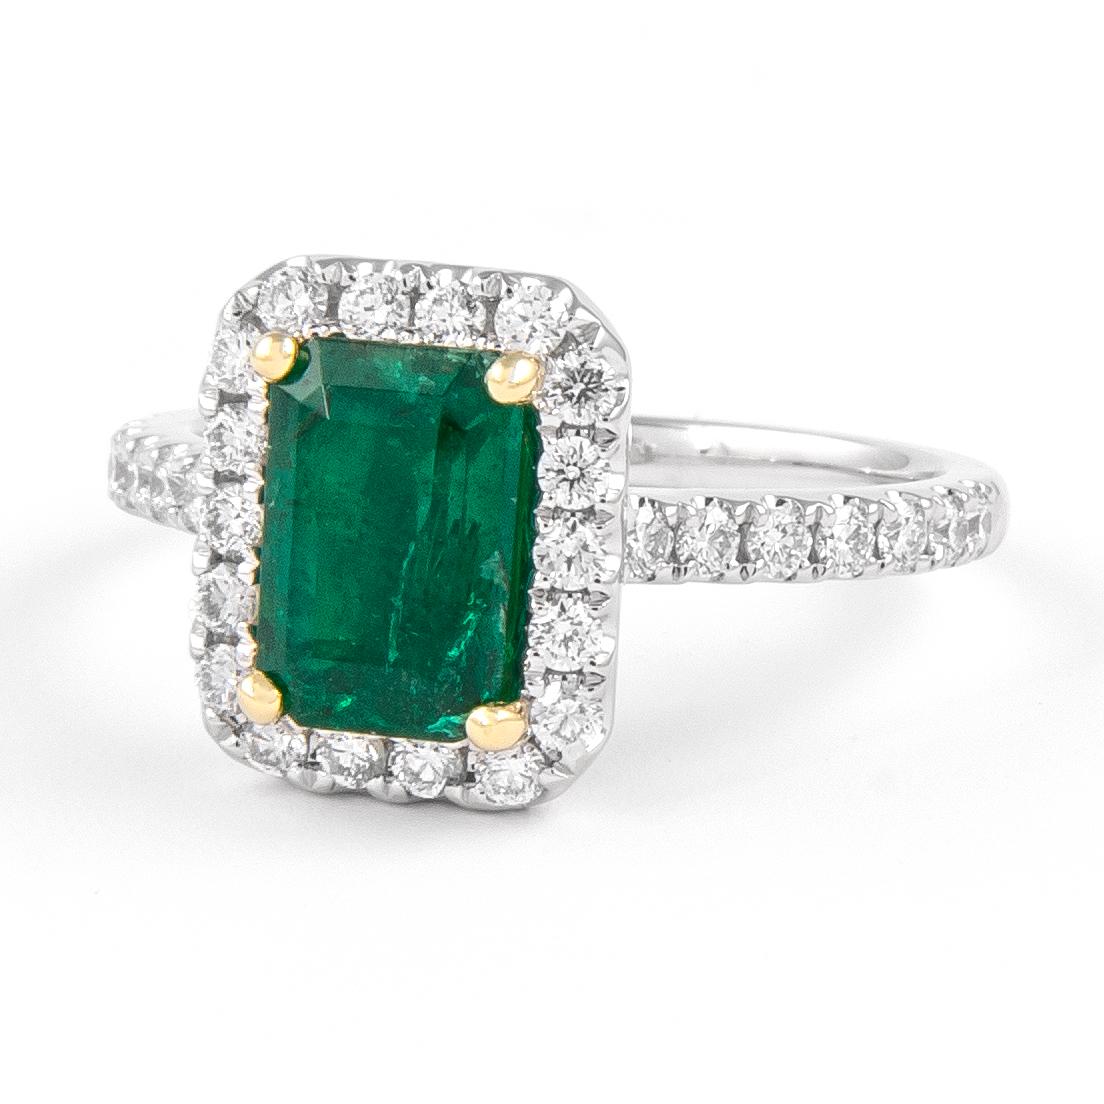 Classic emerald and diamond halo ring, GIA certified. 
2.16 carats total gemstone weight.
1.64 carat emerald cut emerald, F2, GIA certified. Complimented by 32 round brilliant diamonds, 0.52 carats, F/G color and VS clarity. 18k white and yellow